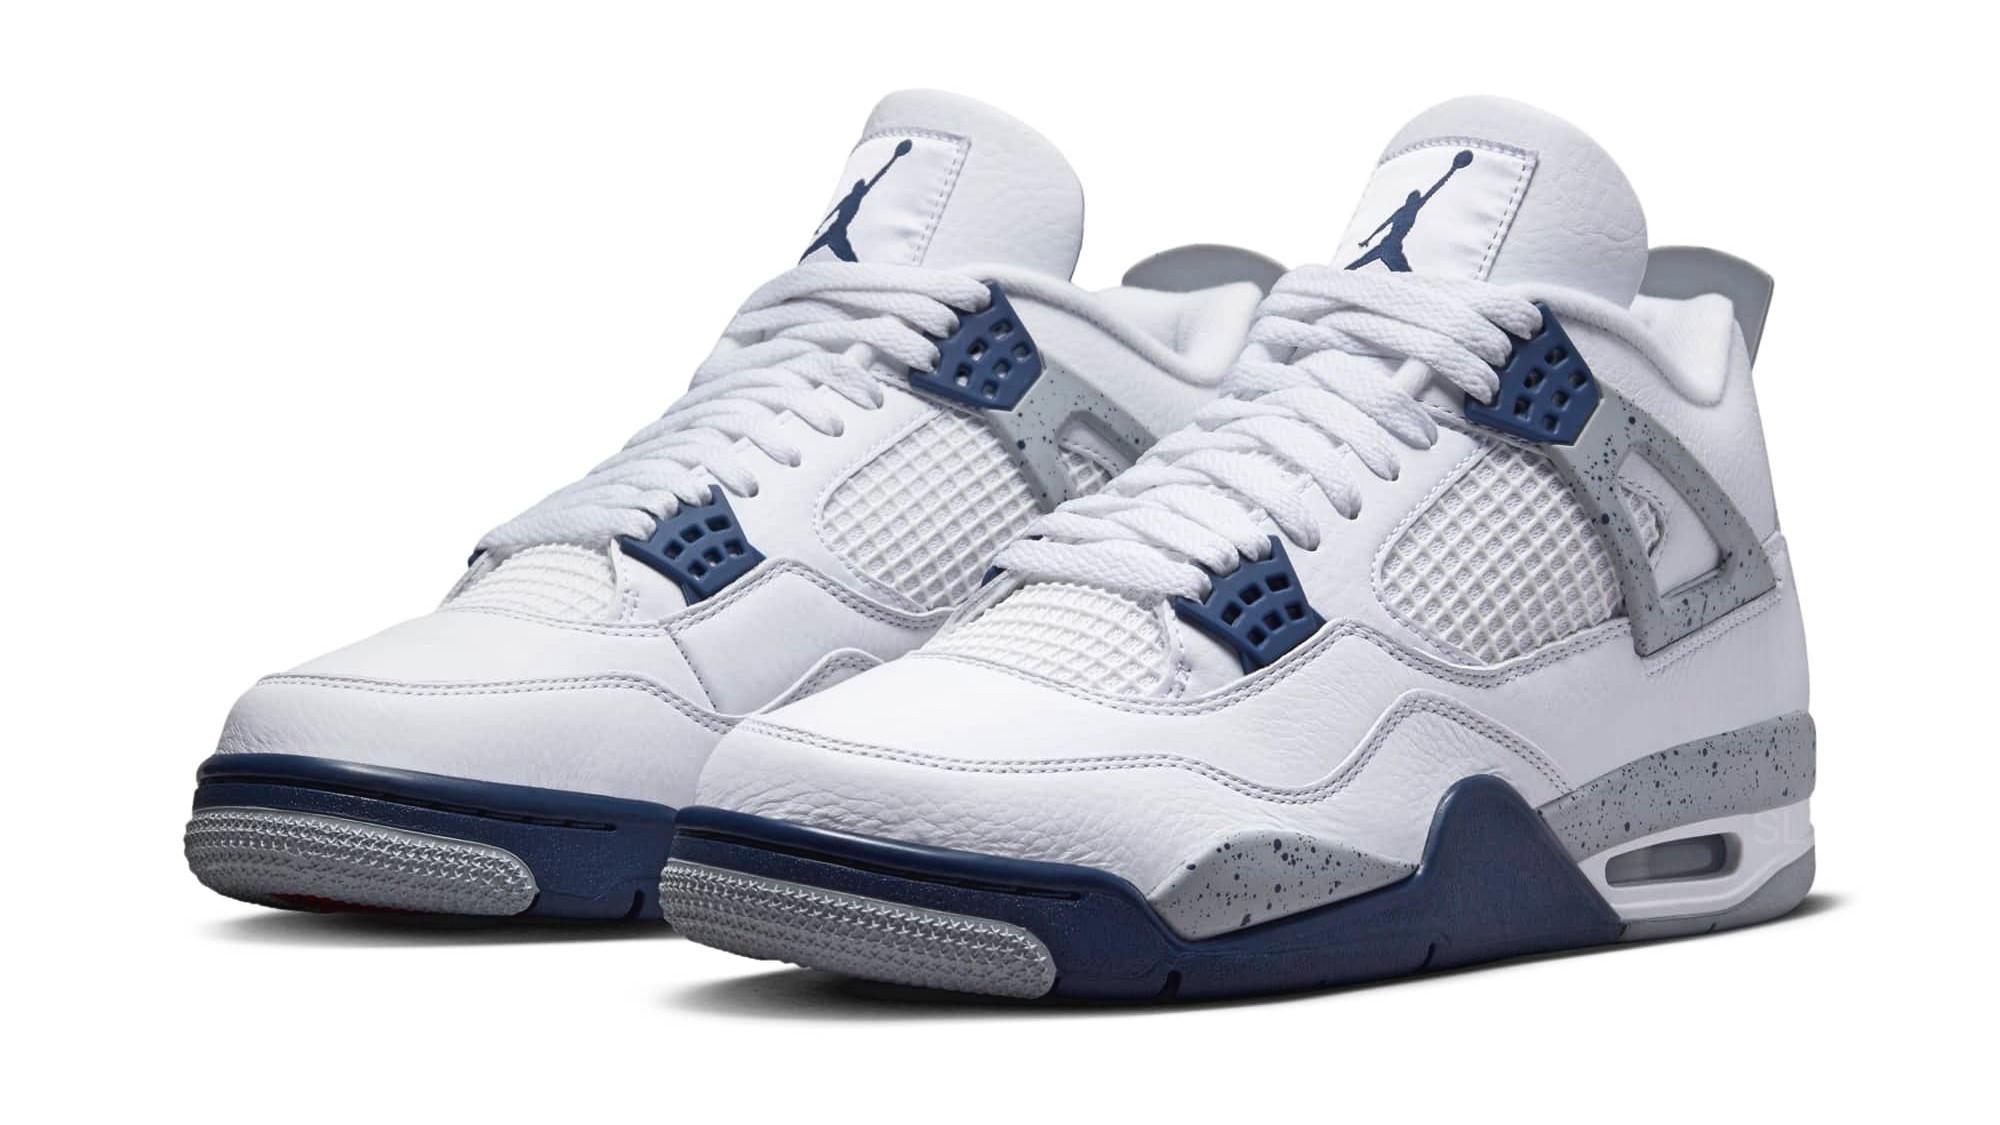 The 'Midnight Navy' Air Jordan 4 Releases This Fall